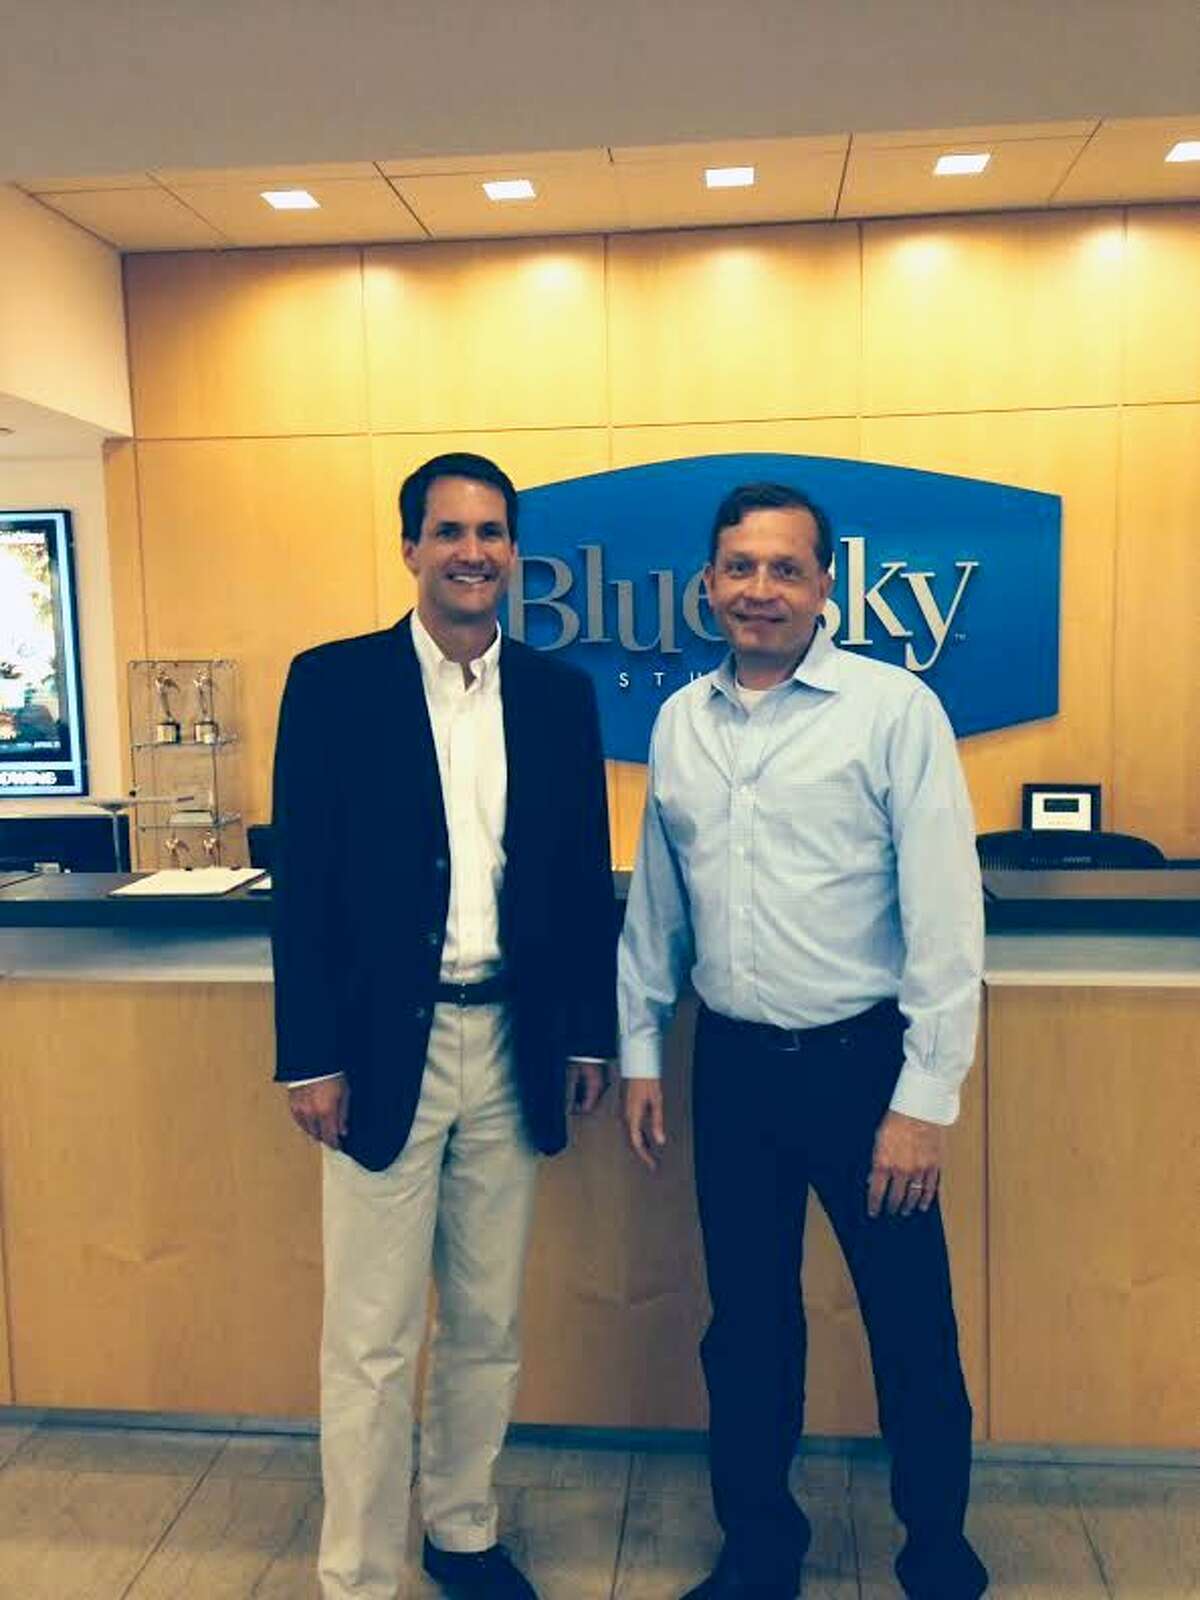 Congressman Jim Himes meets with Blue Sky Studios CEO Brian Keane, who also serves as Executive Vice President of the company. of Blue Sky Studios.